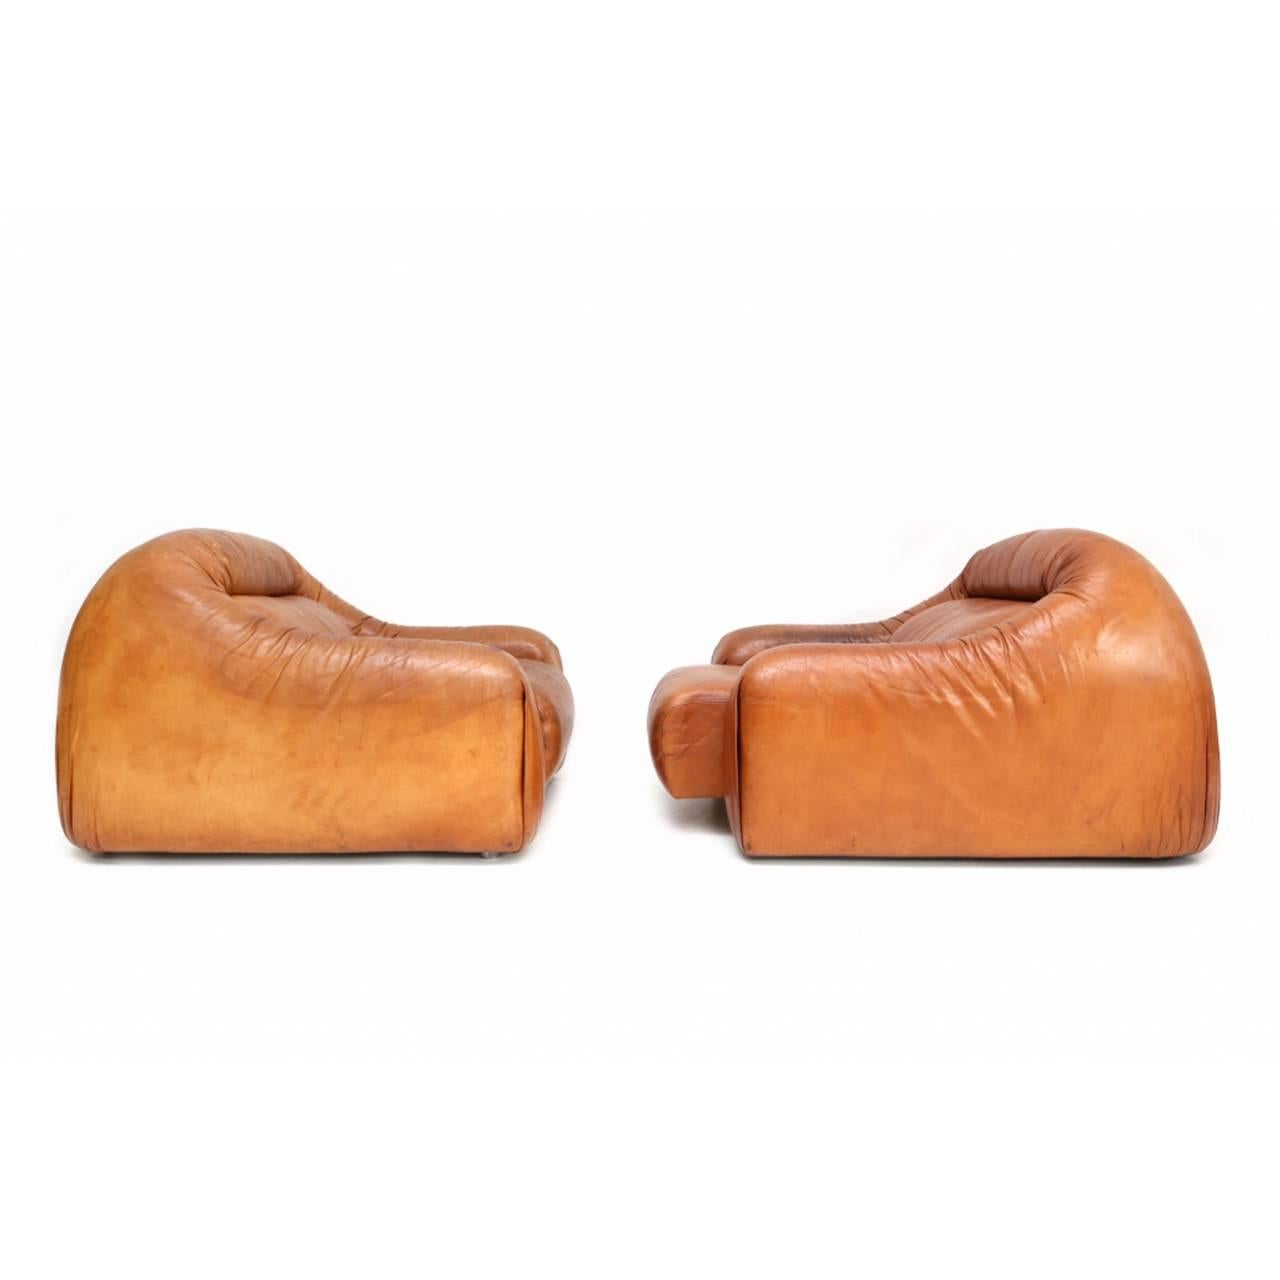 Unique low leather club chairs. Light aged tan leather with flat base.
Sold as a pair.